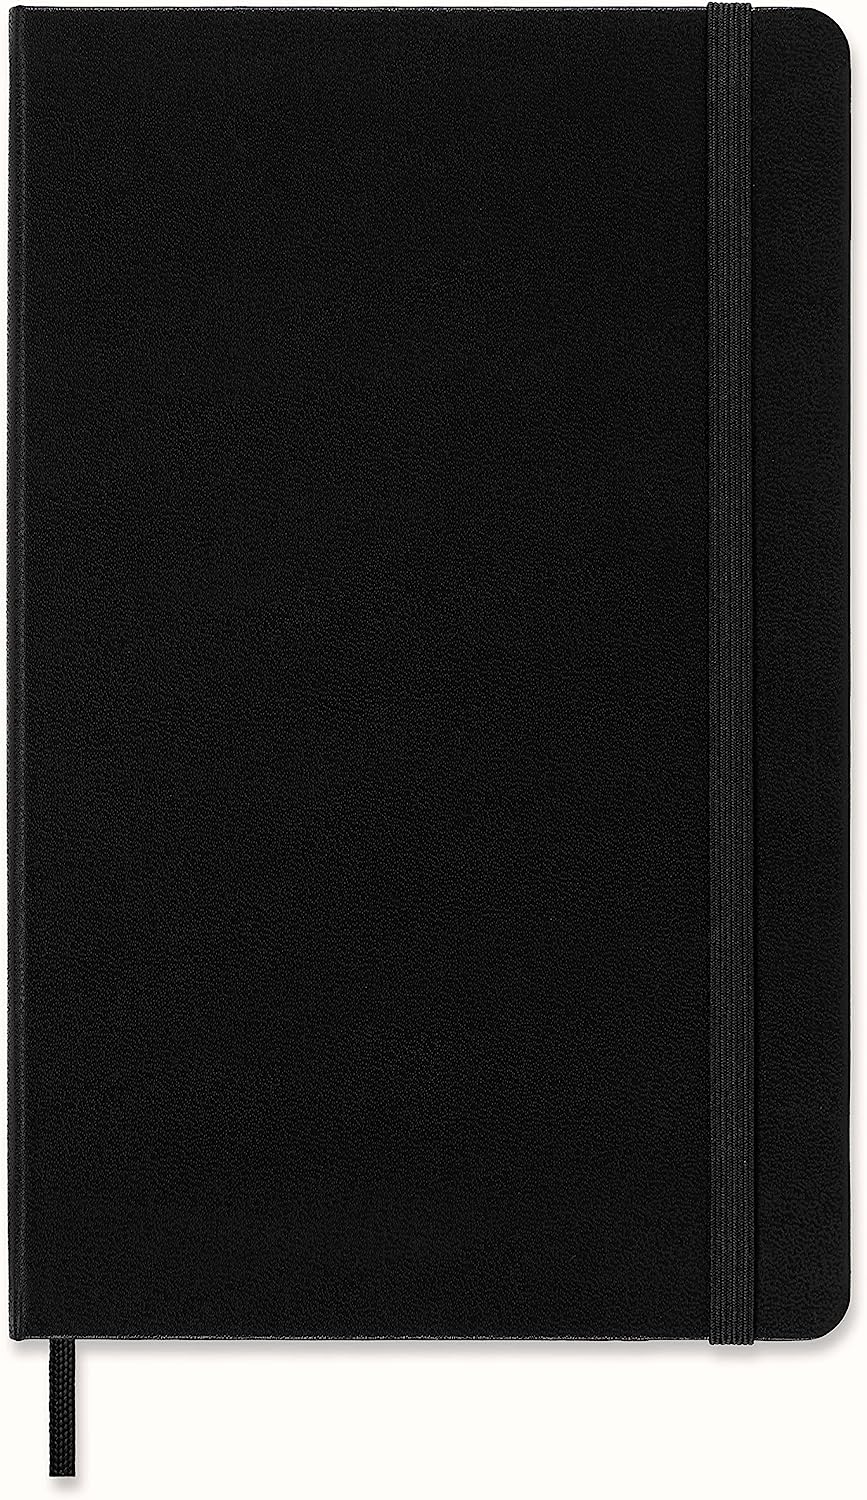 squared-grid-classic-notebook-hard-cover-large-black